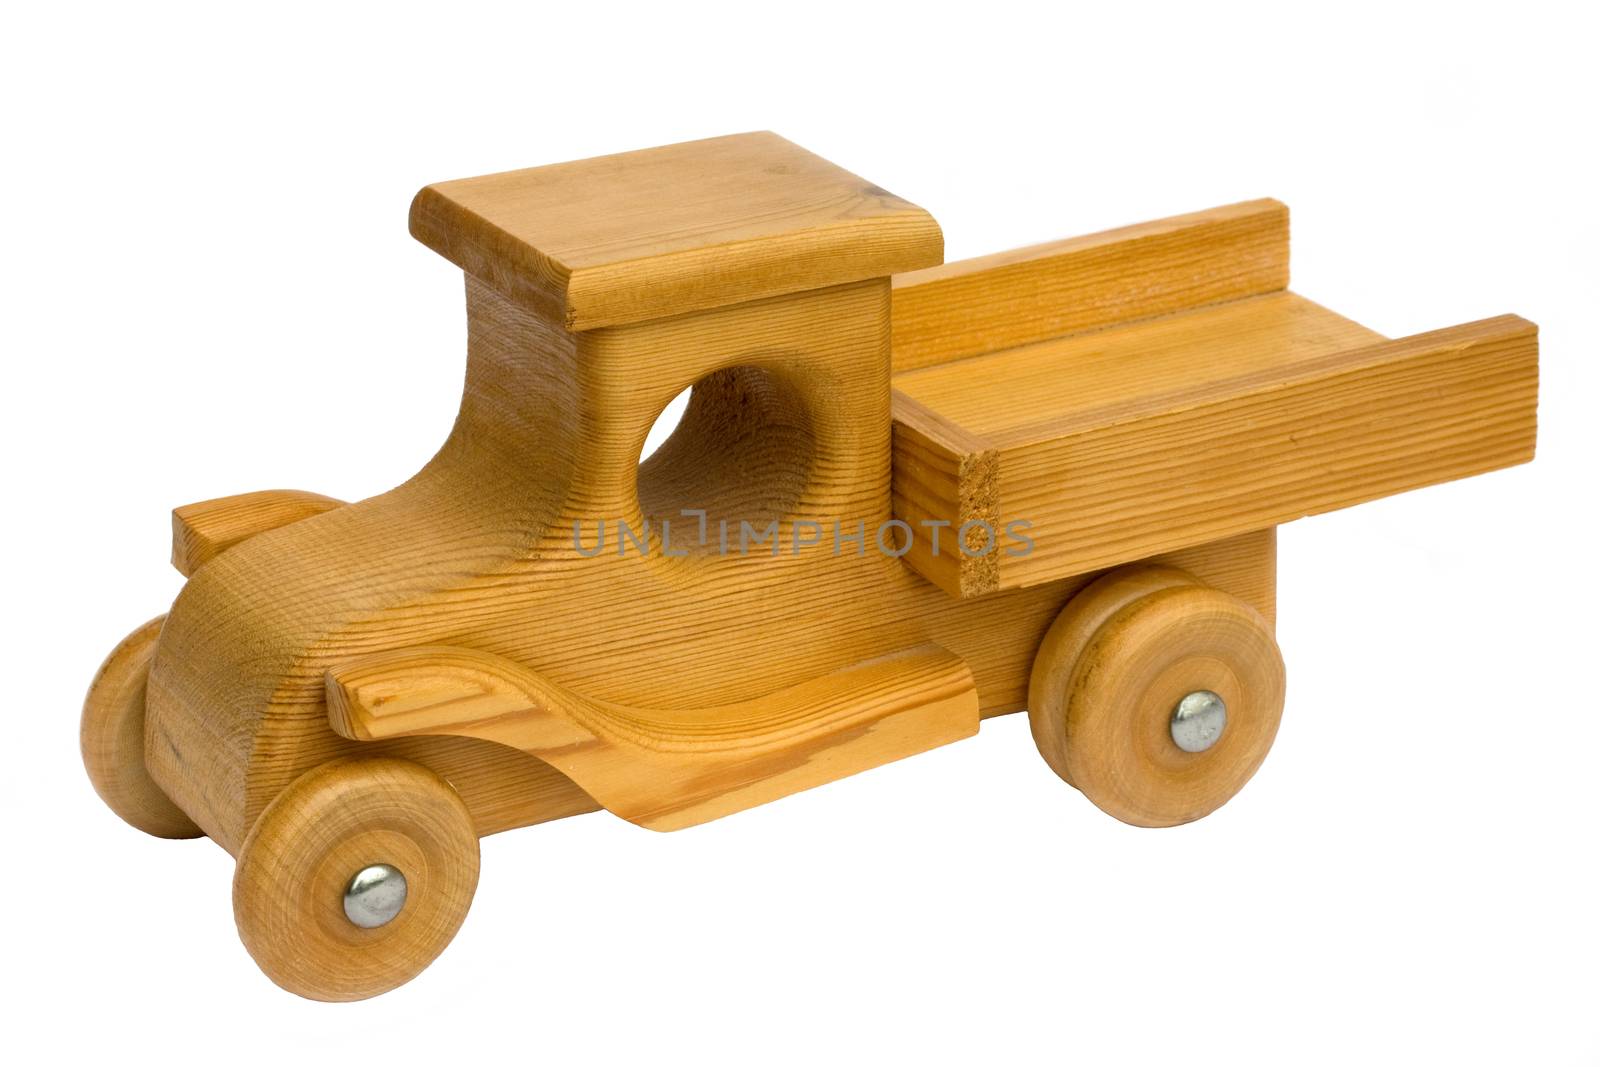 Wooden toy truck by kavring